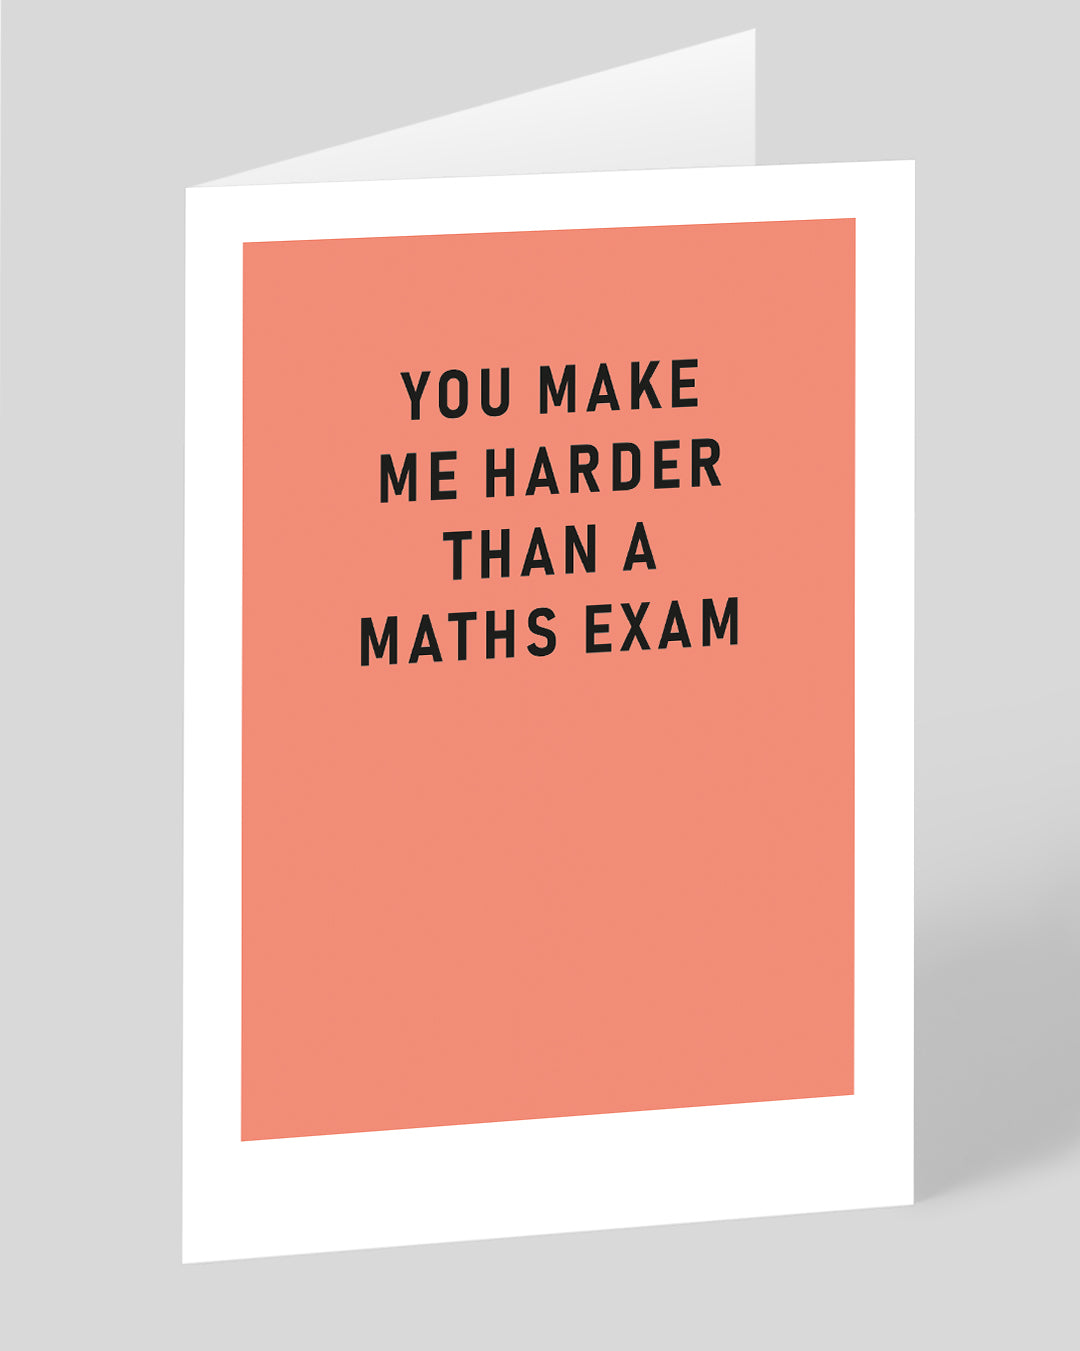 Valentine’s Day | Rude Valentines Card For Her or Him | Personalised Harder Than A Maths Exam Greeting Card | Ohh Deer Unique Valentine’s Card | Made In The UK, Eco-Friendly Materials, Plastic Free Packaging